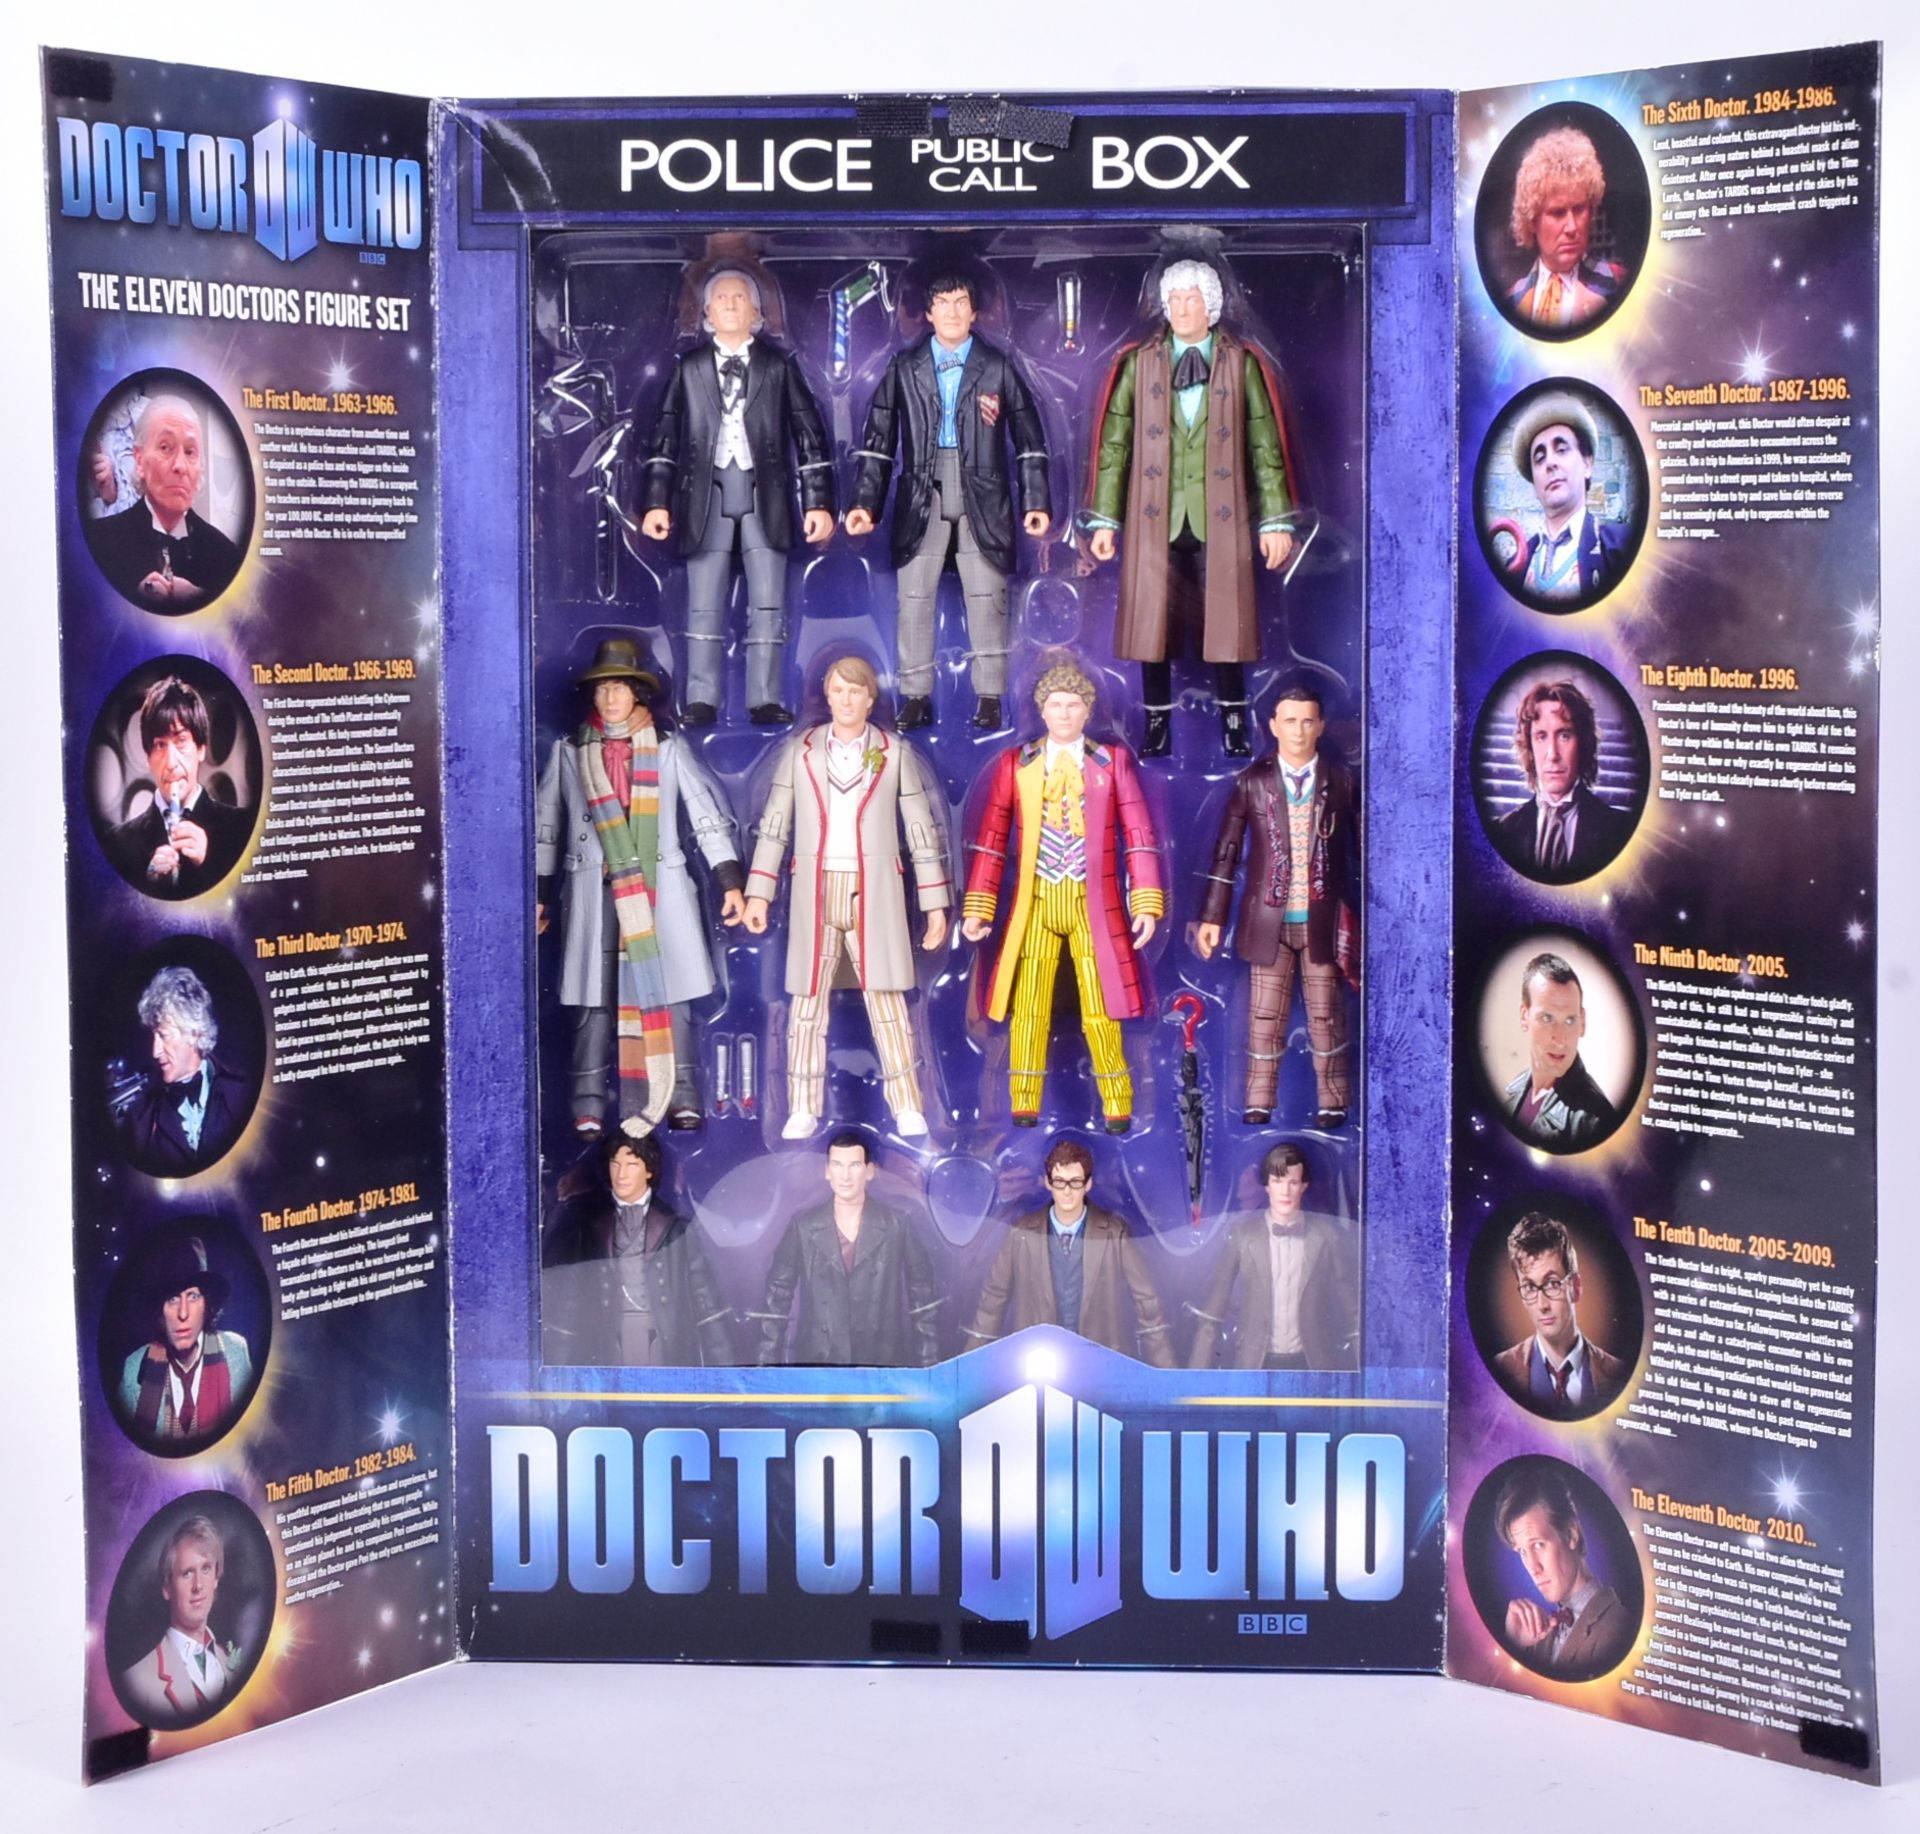 DOCTOR WHO - CHARACTER OPTIONS - ELEVEN DOCTOR FIGURE SET - Image 2 of 6